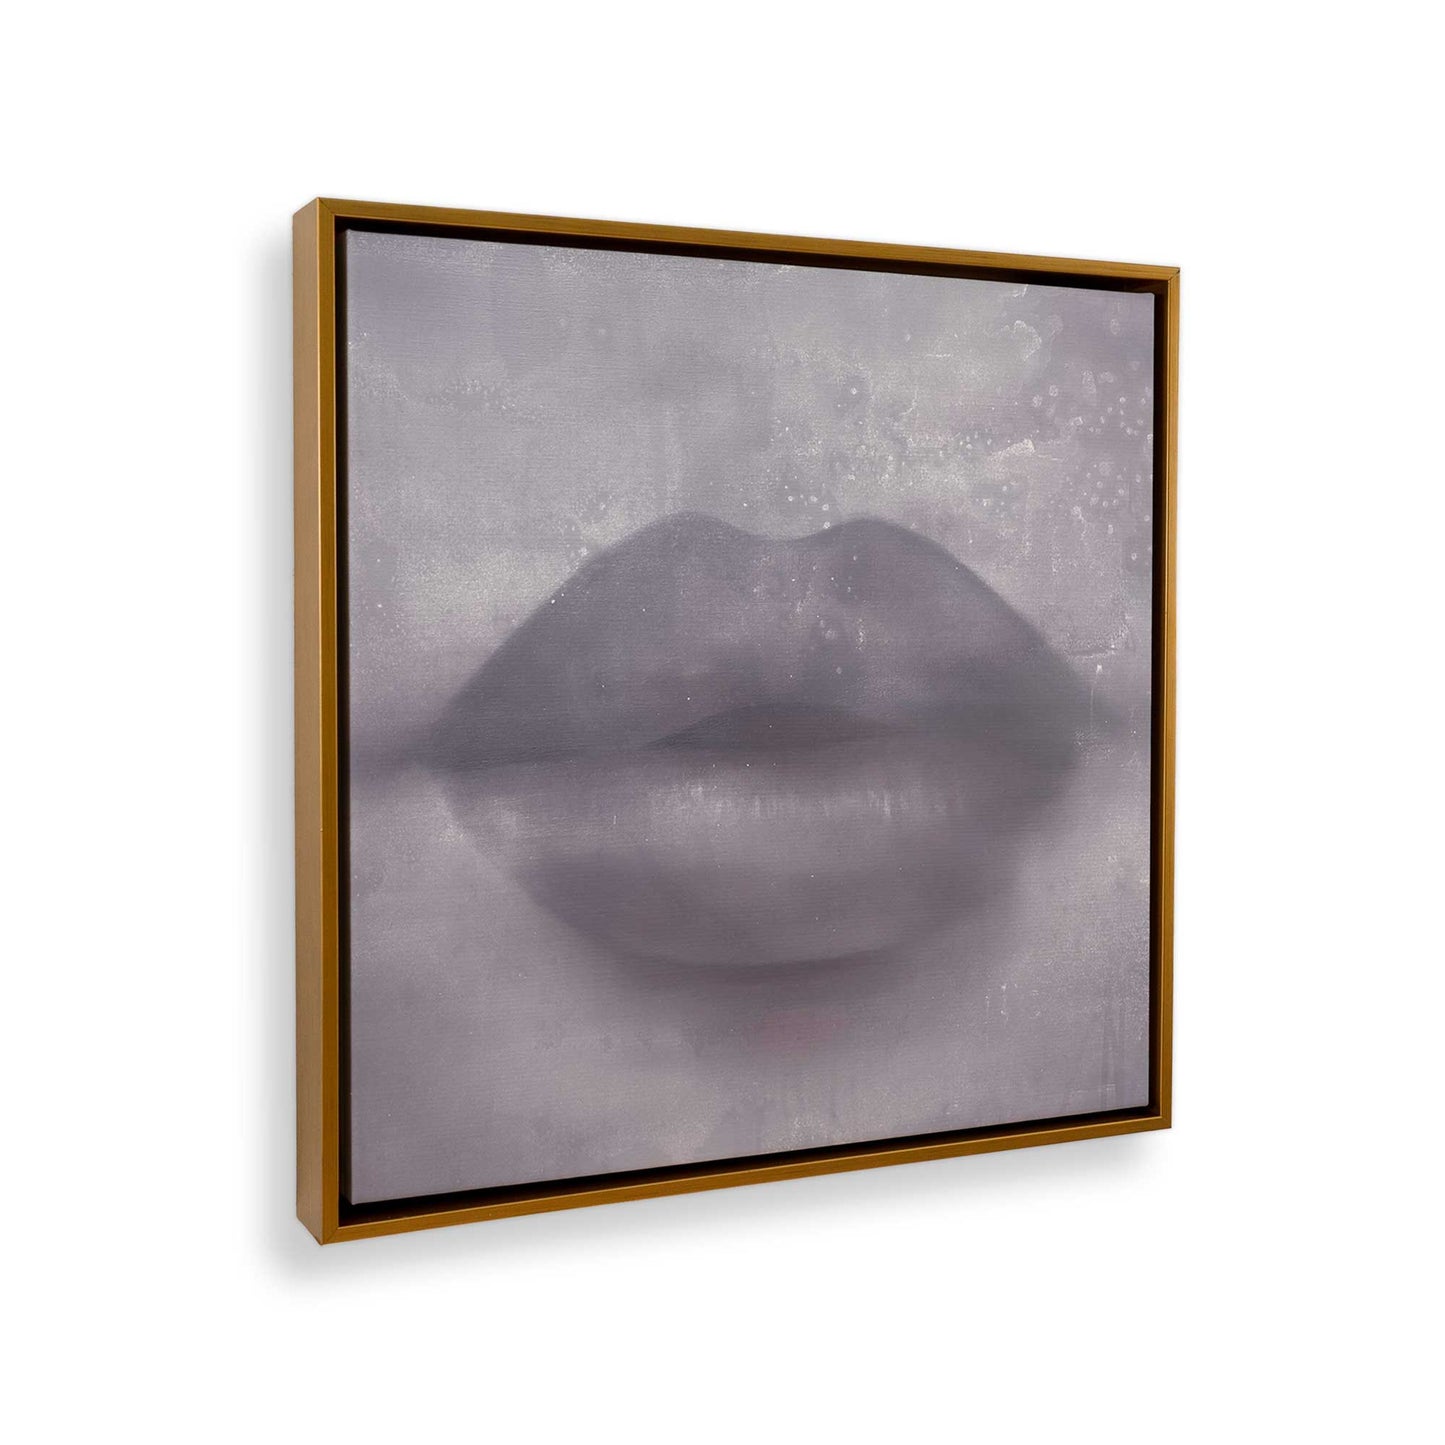 [Color:Polished Gold], Picture of art in a Polished Gold frame at an angle